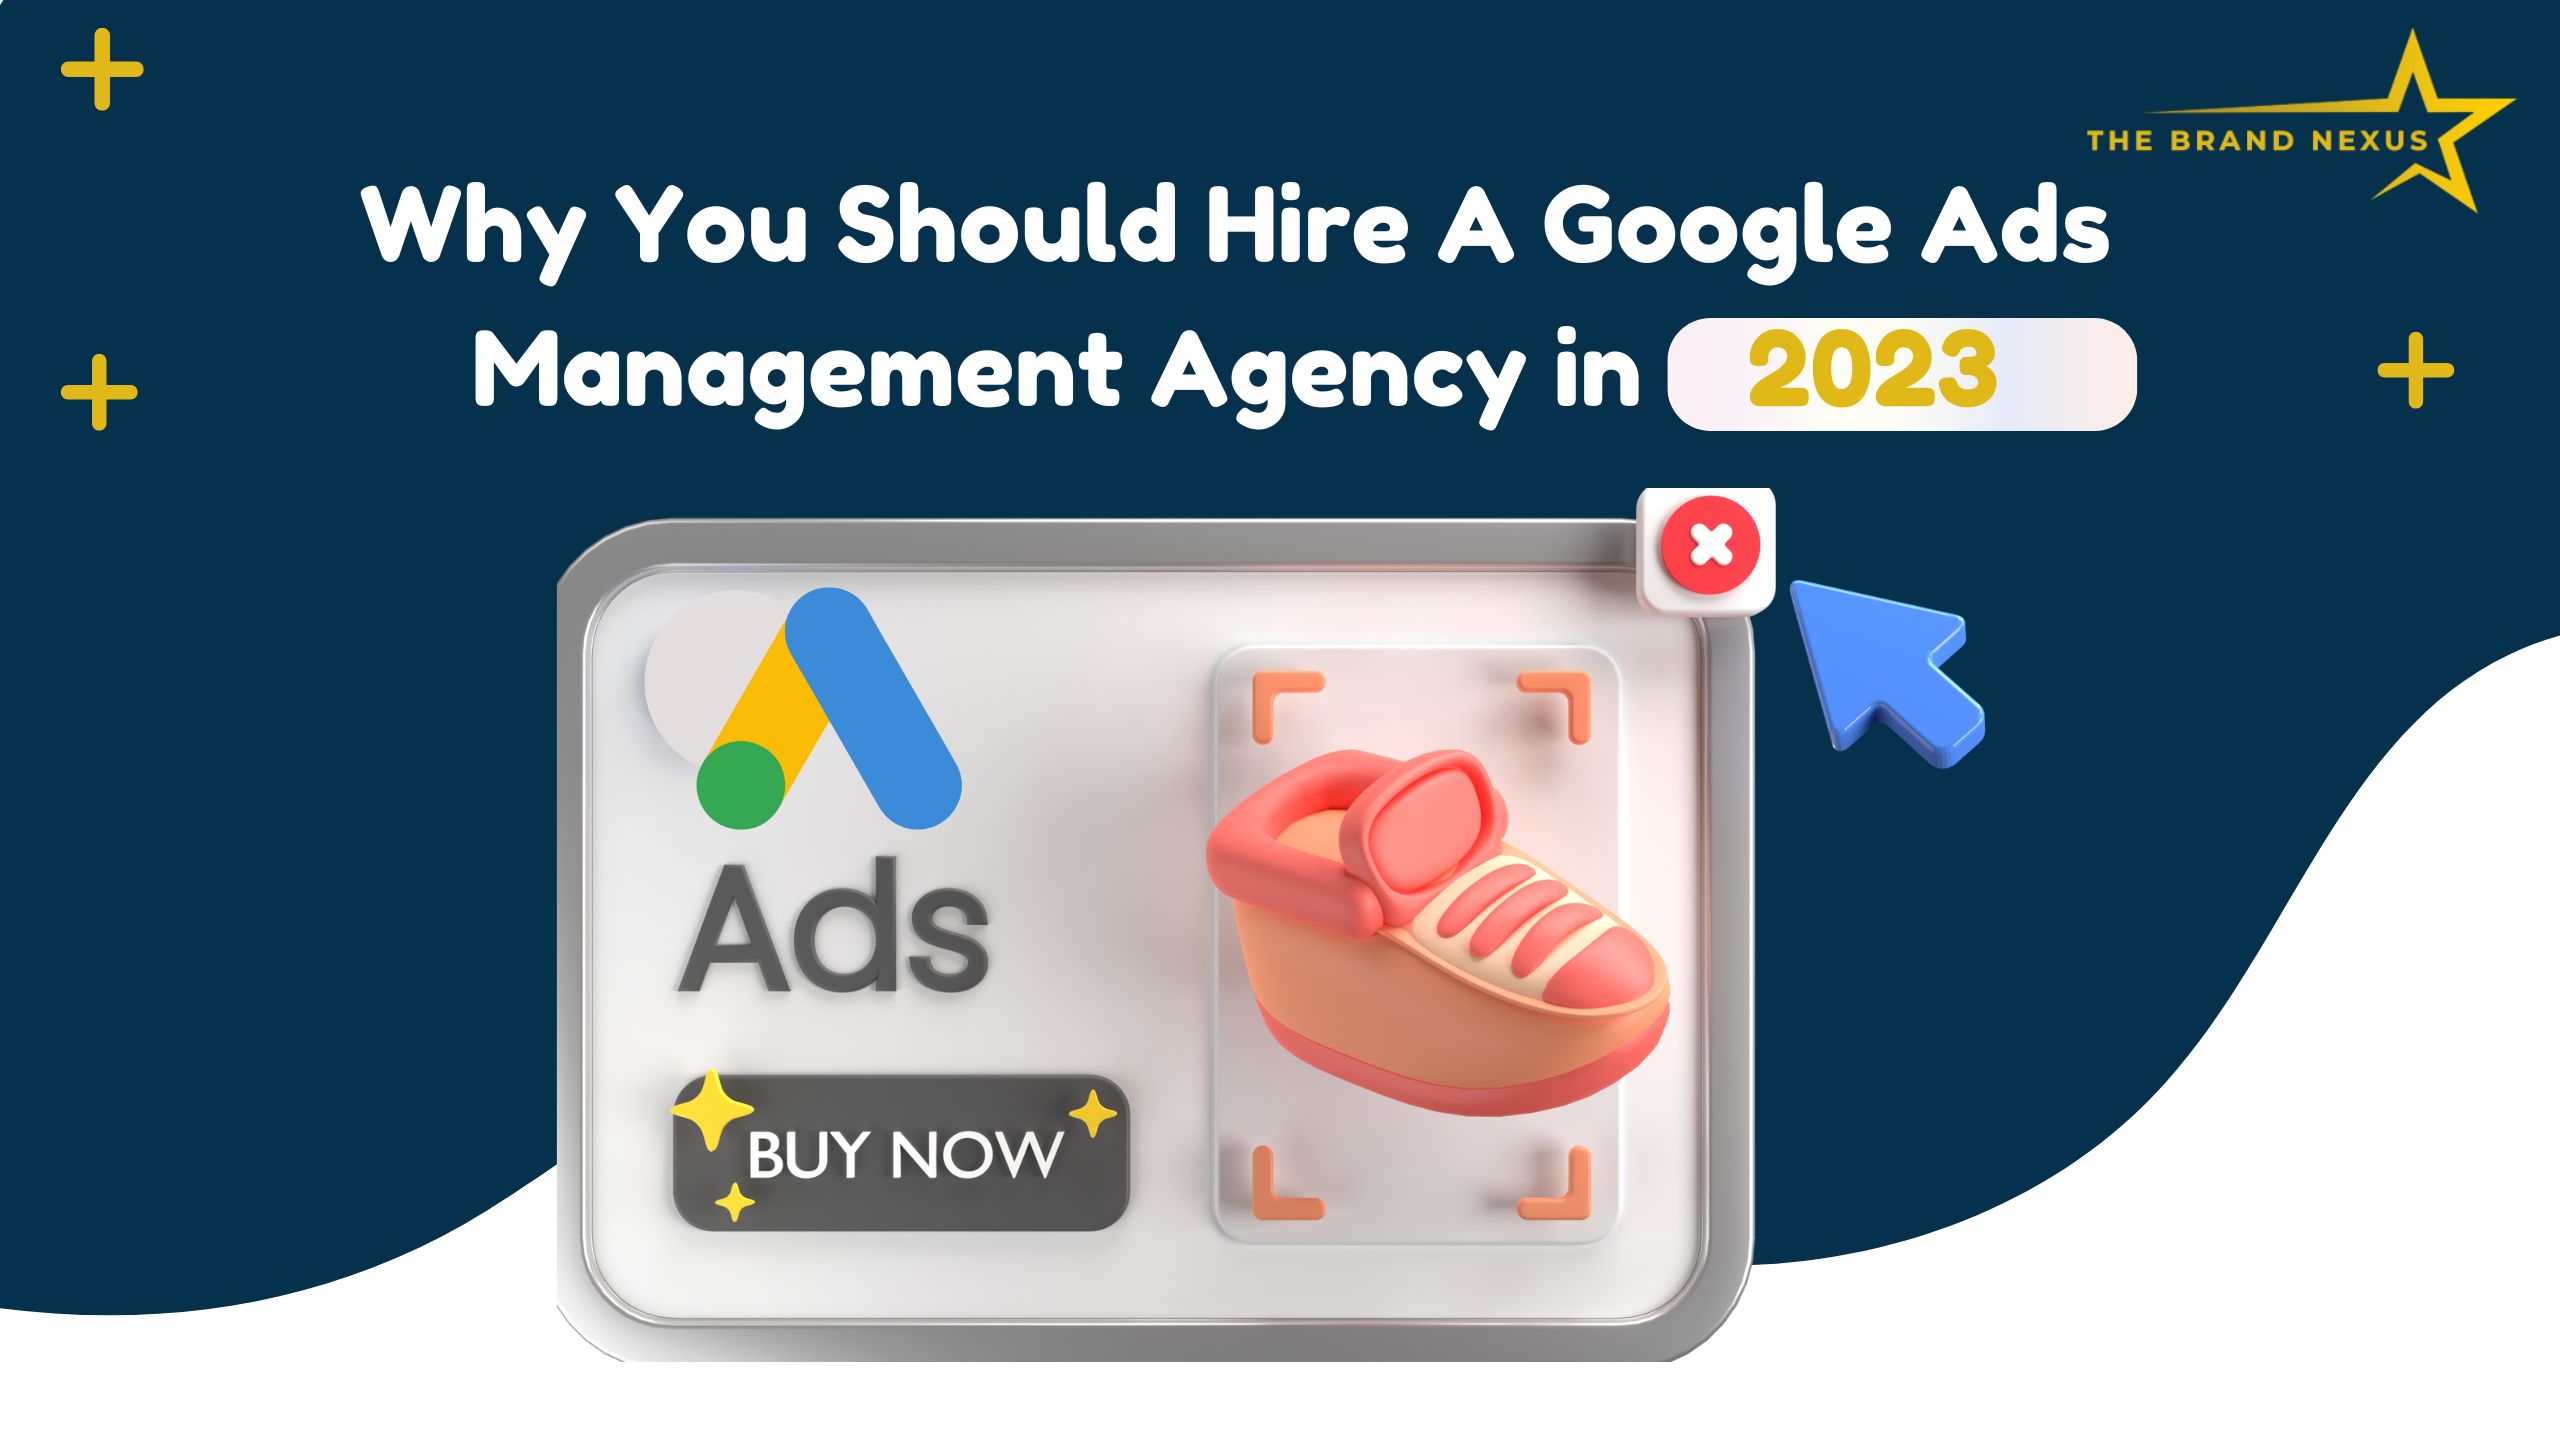 Google Ads Management Agency in India